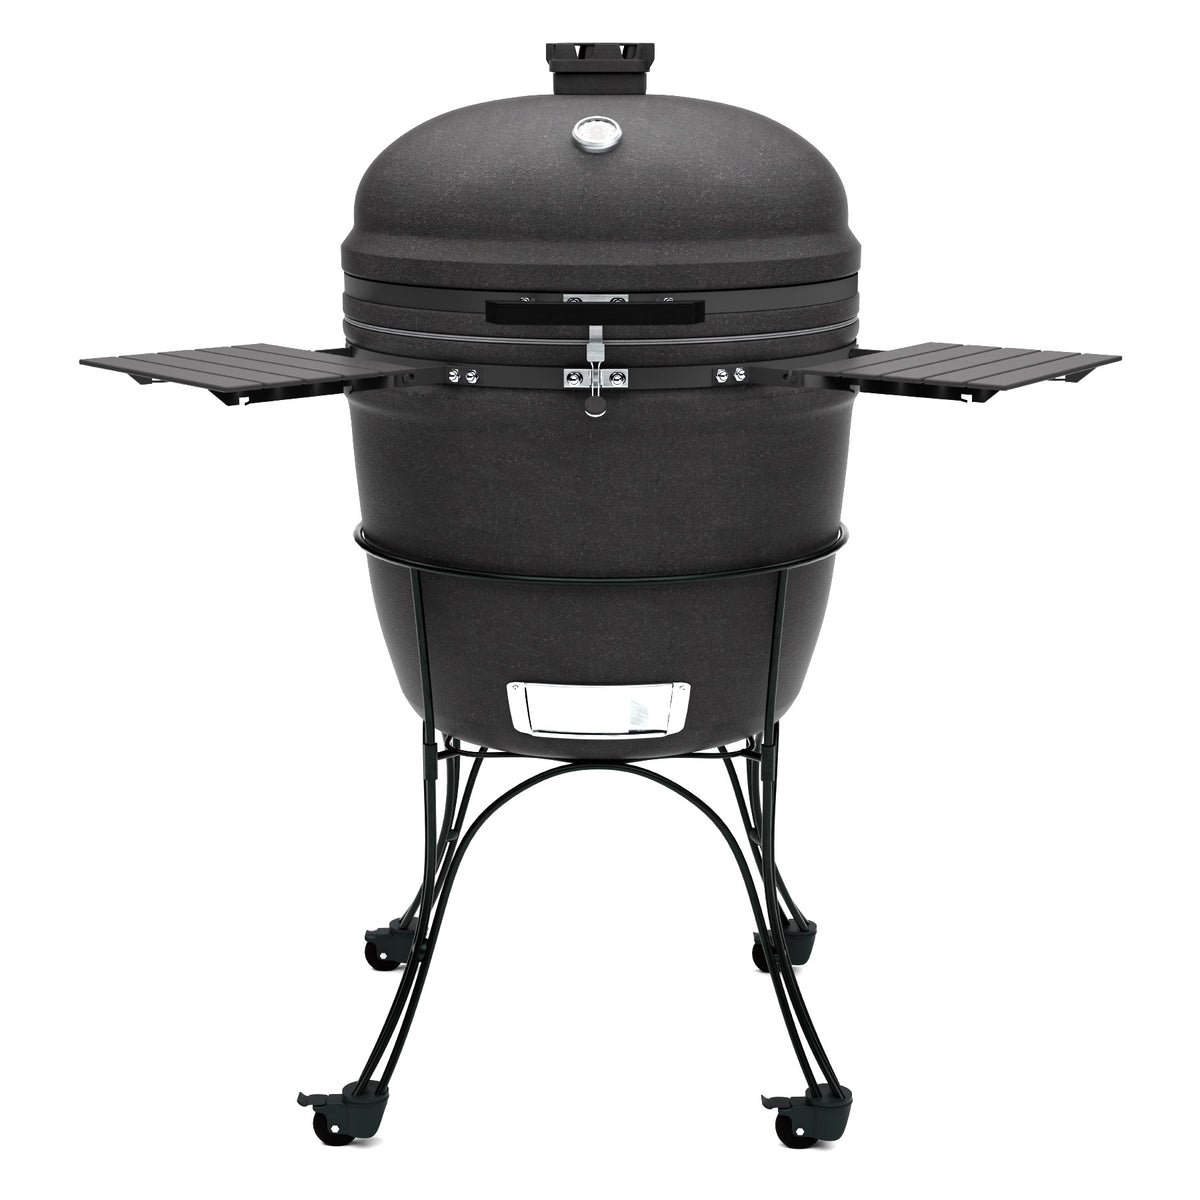 Draco Grills 27 Inch Kamado Grill with Wire Stand